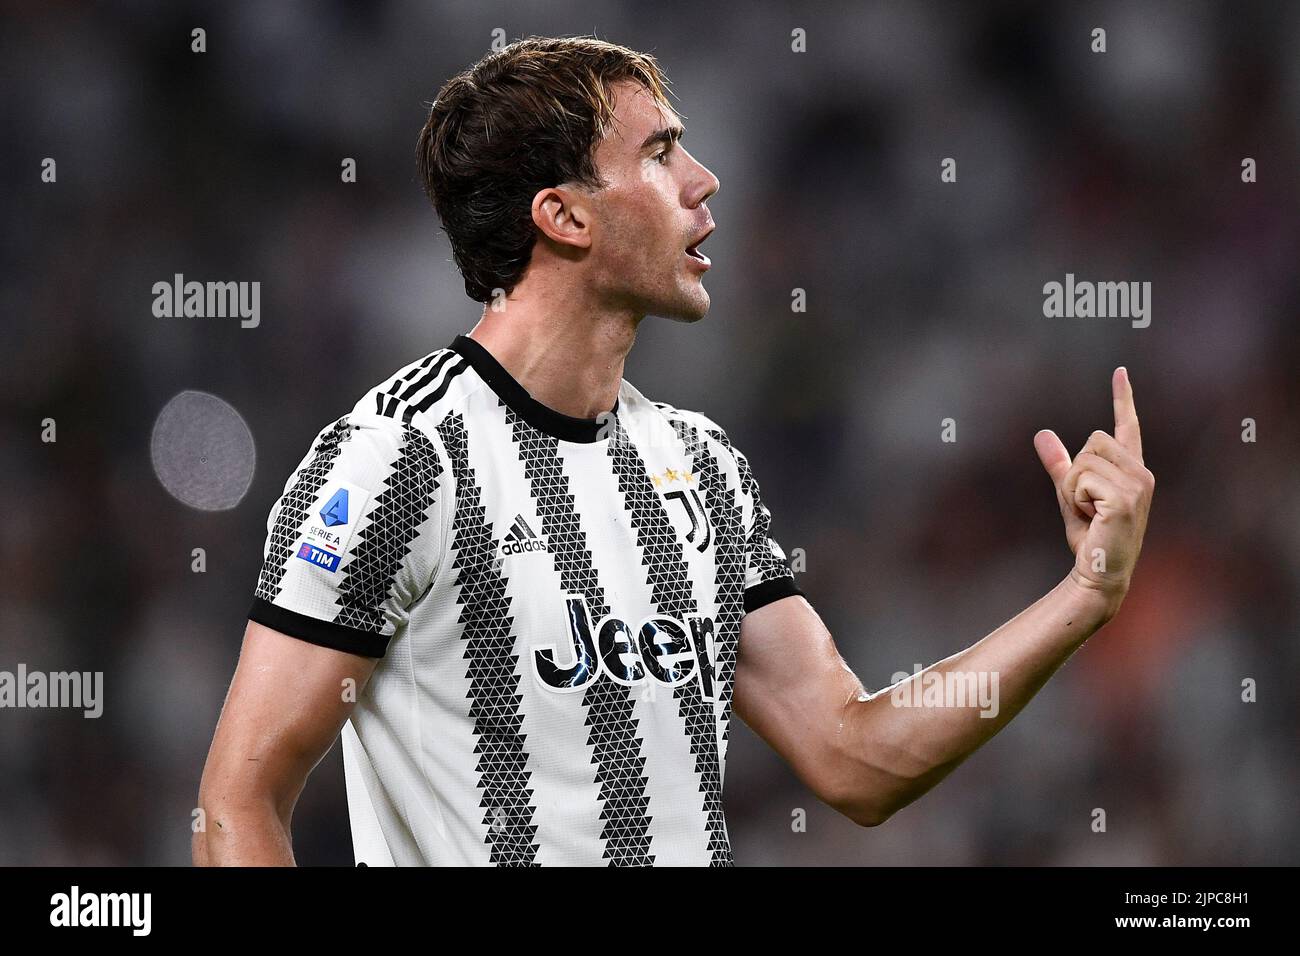 Turin, Italy. 15 August 2022. Dusan Vlahovic of Juventus FC celebrates after scoring a goal from a penalty kick during the Serie A football match between Juventus FC and US Sassuolo. Credit: Nicolò Campo/Alamy Live News Stock Photo